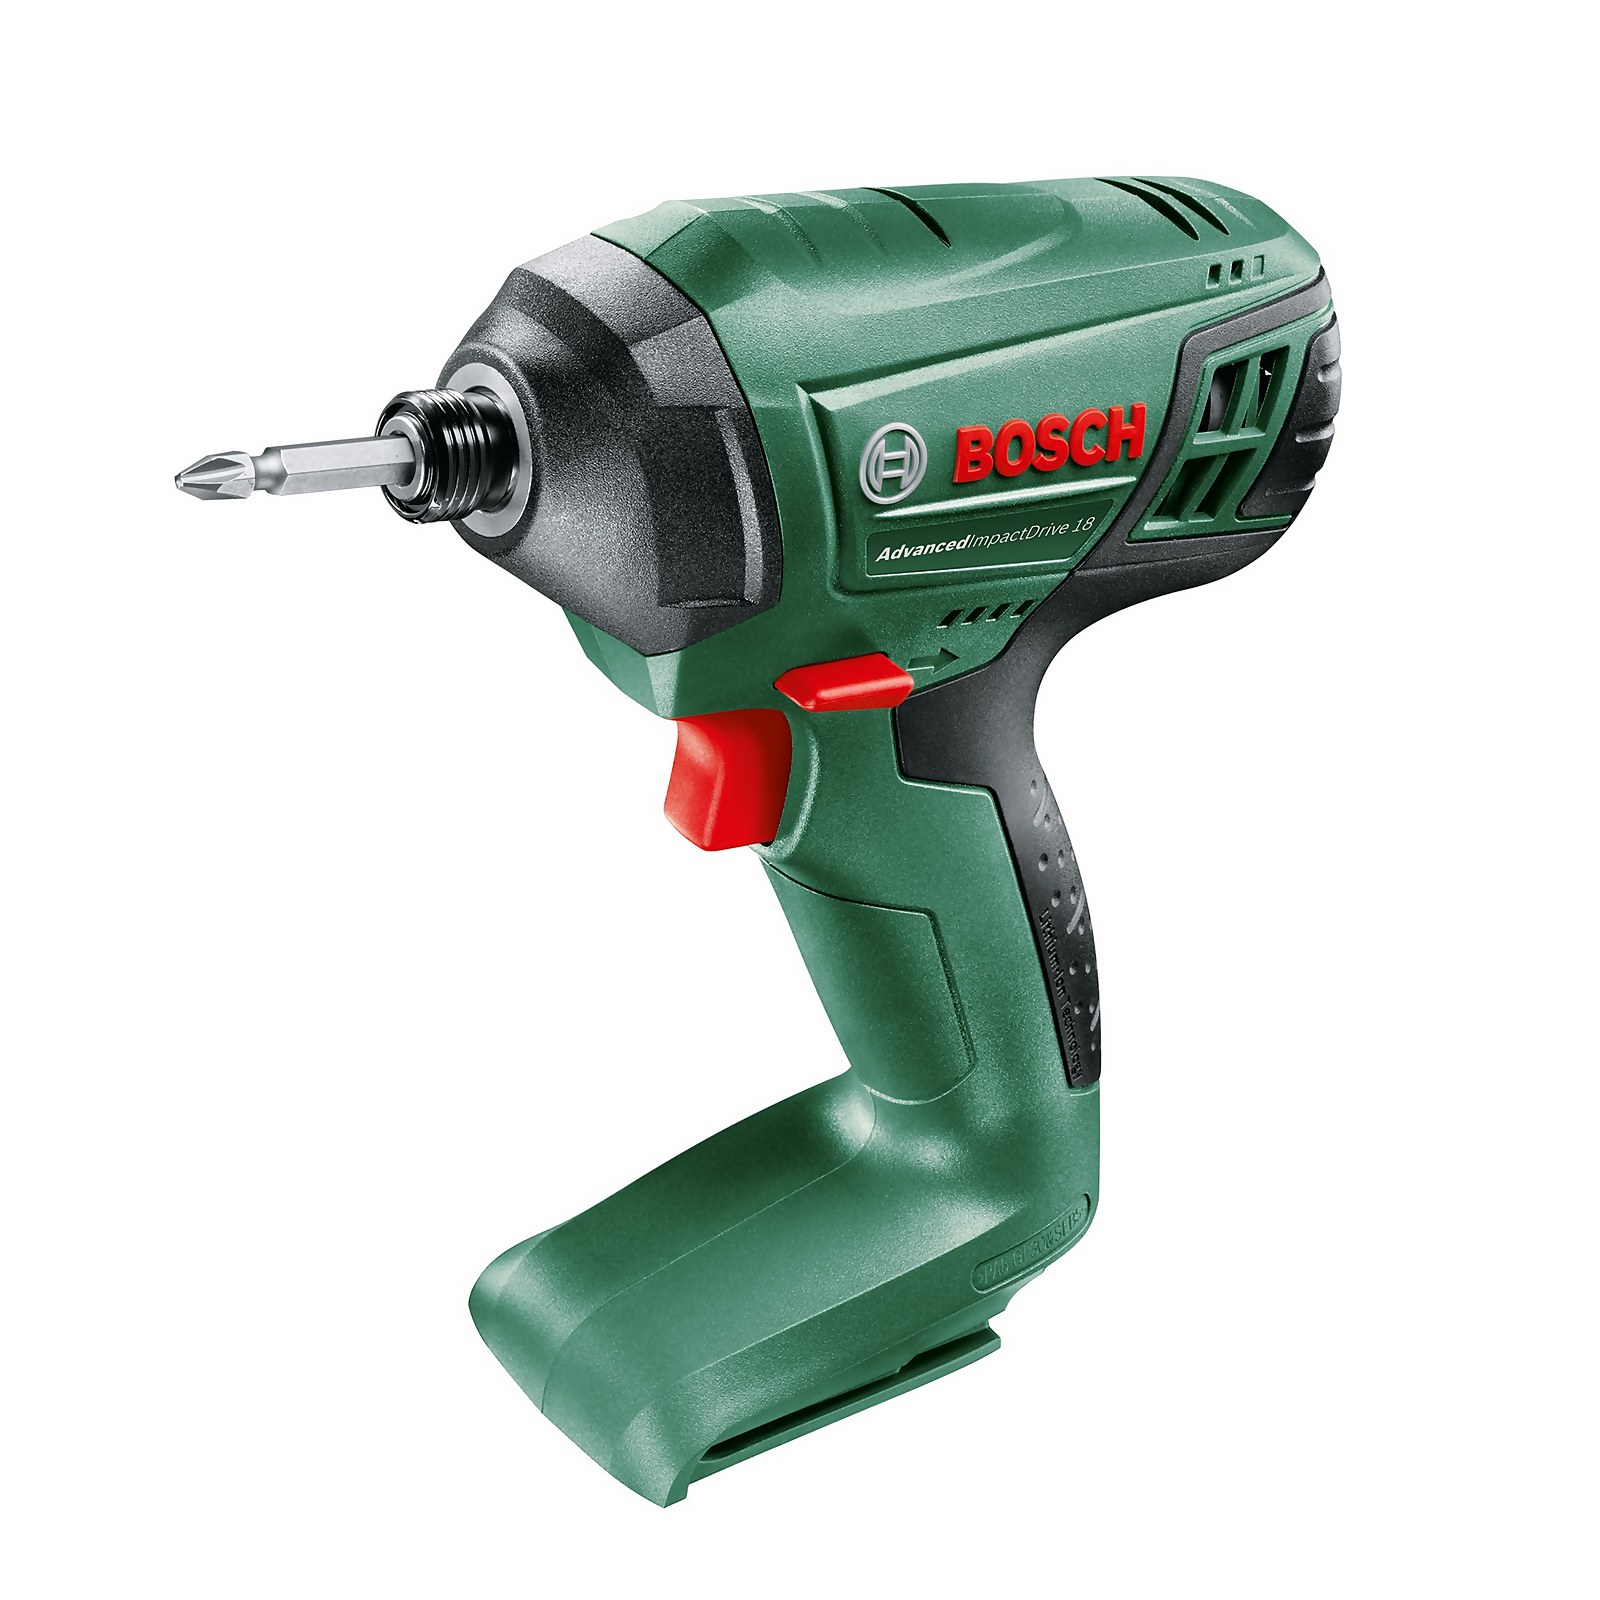 Photo of Bosch Advancedimpactdrive 18 Impact Driver -no Battery Included-